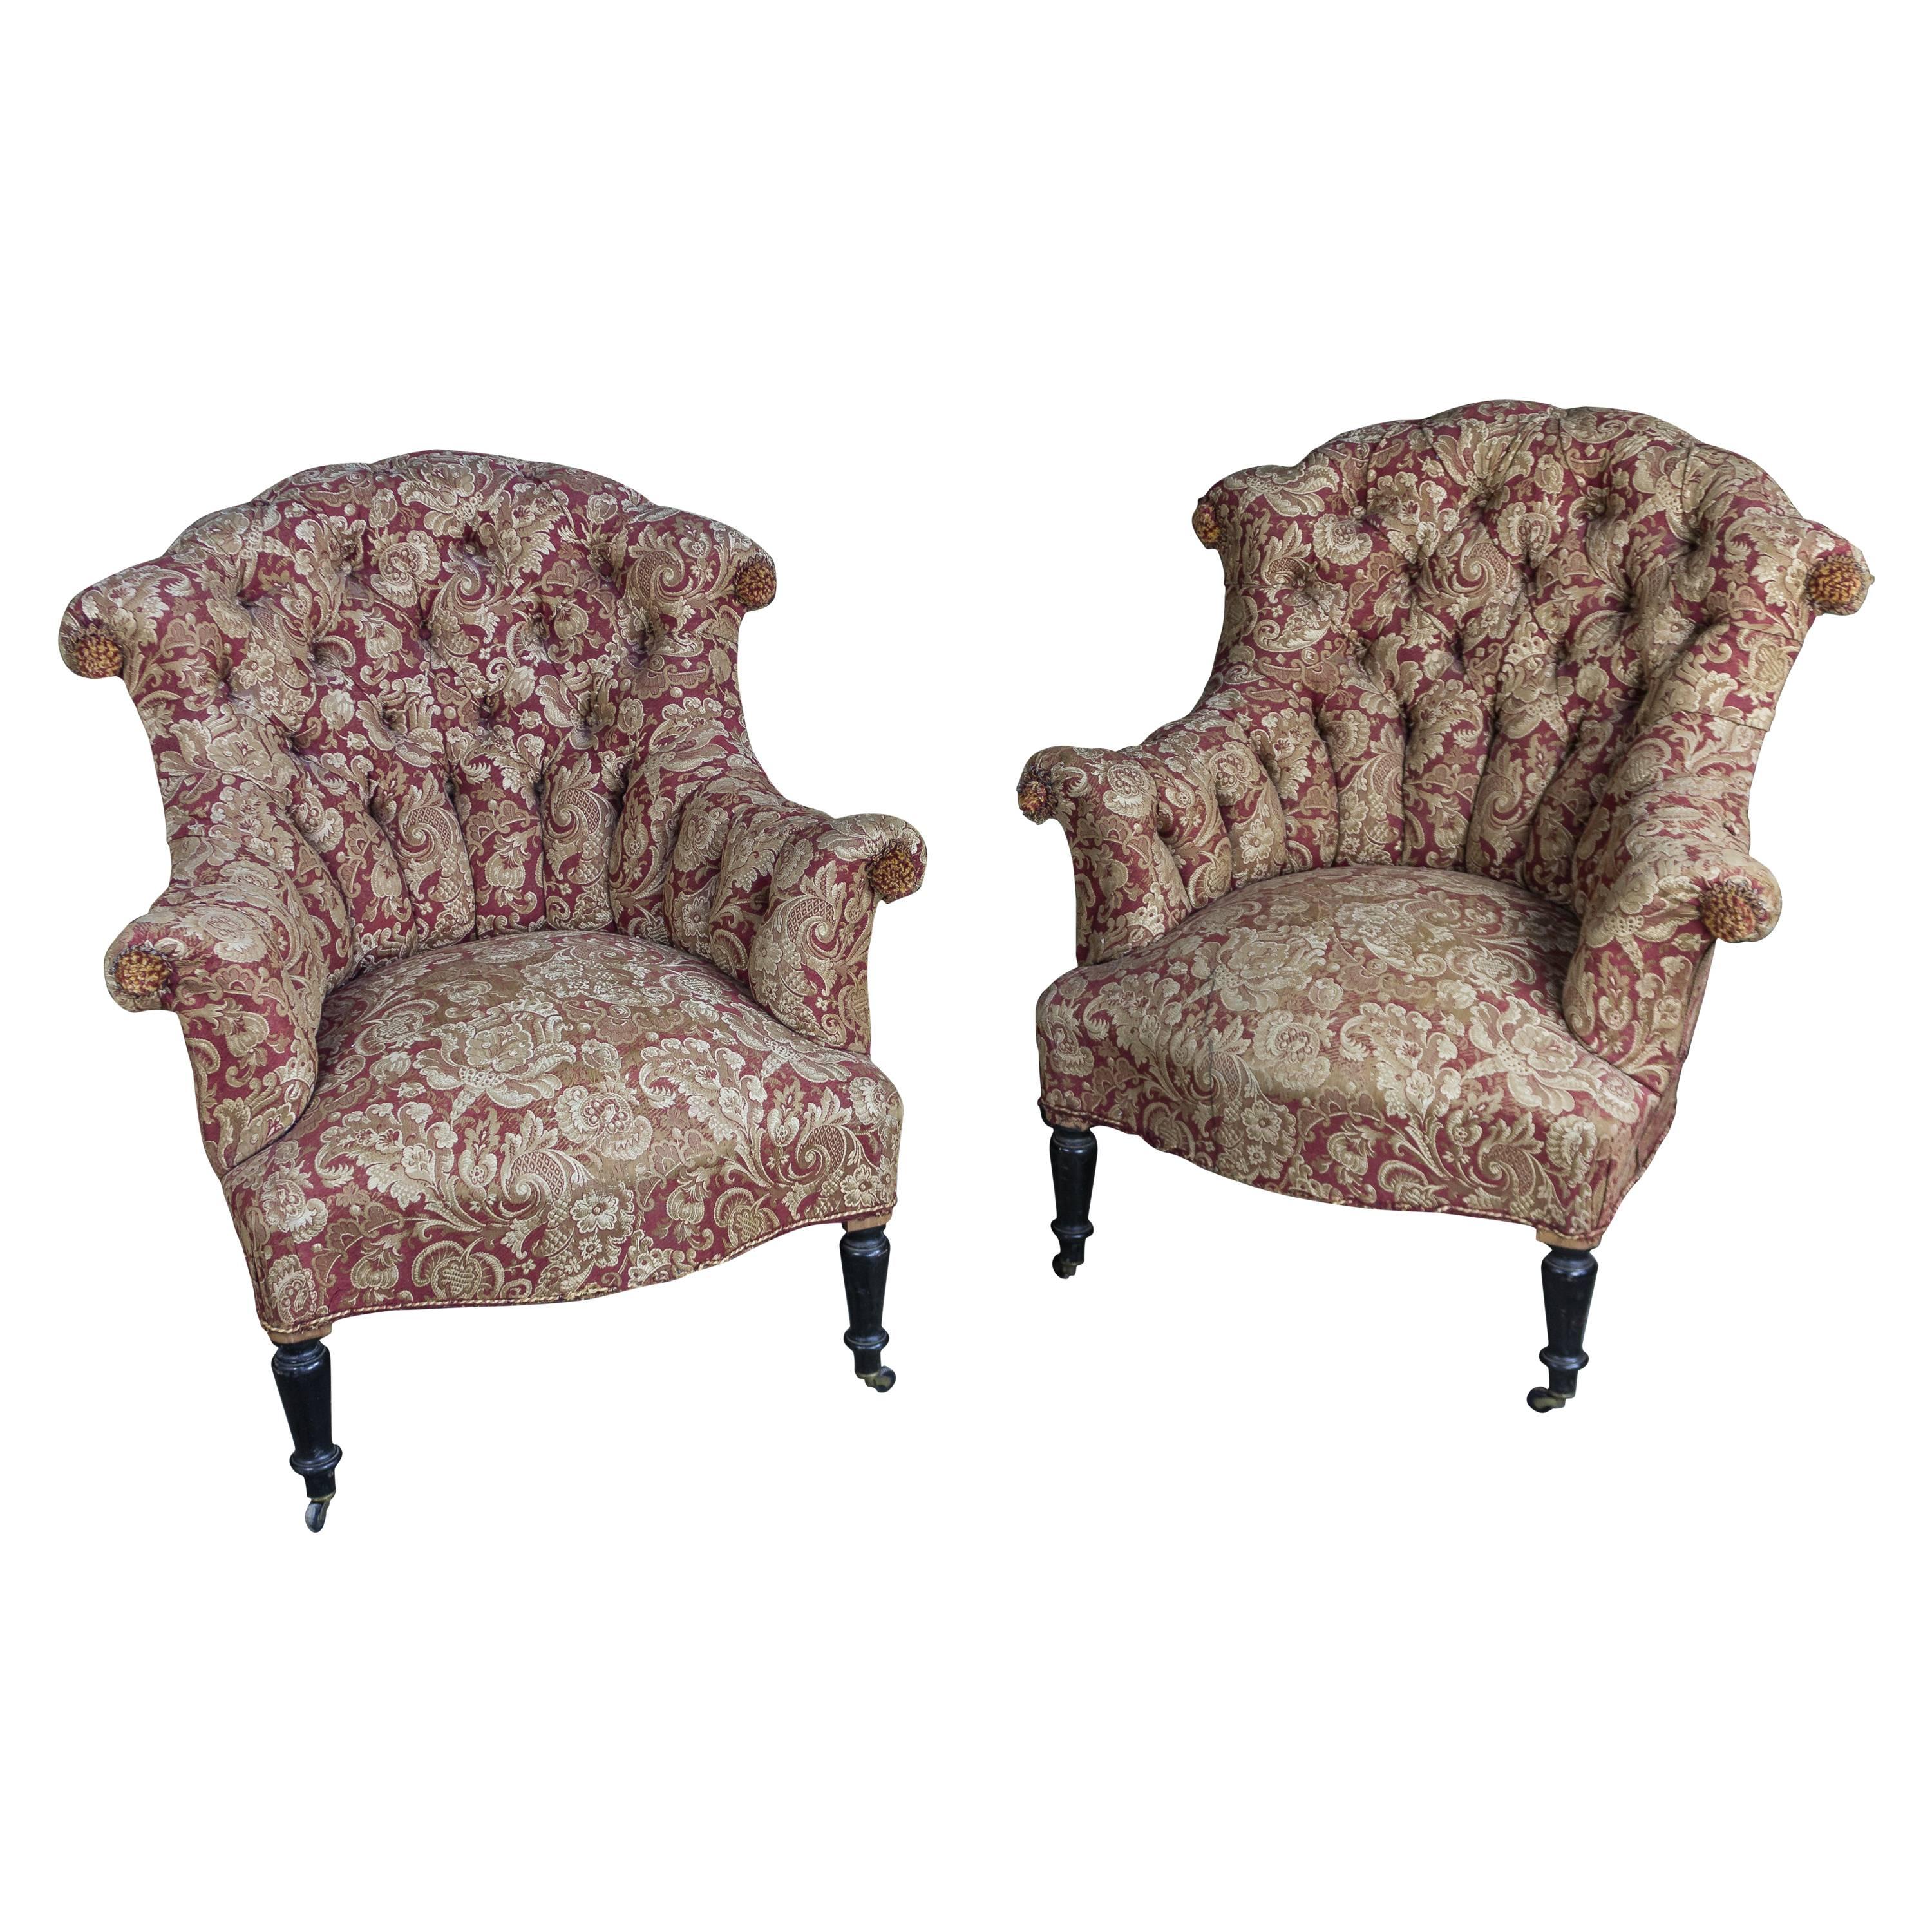 Pair of Tufted and Scrolled Back Chairs in Printed Velvet